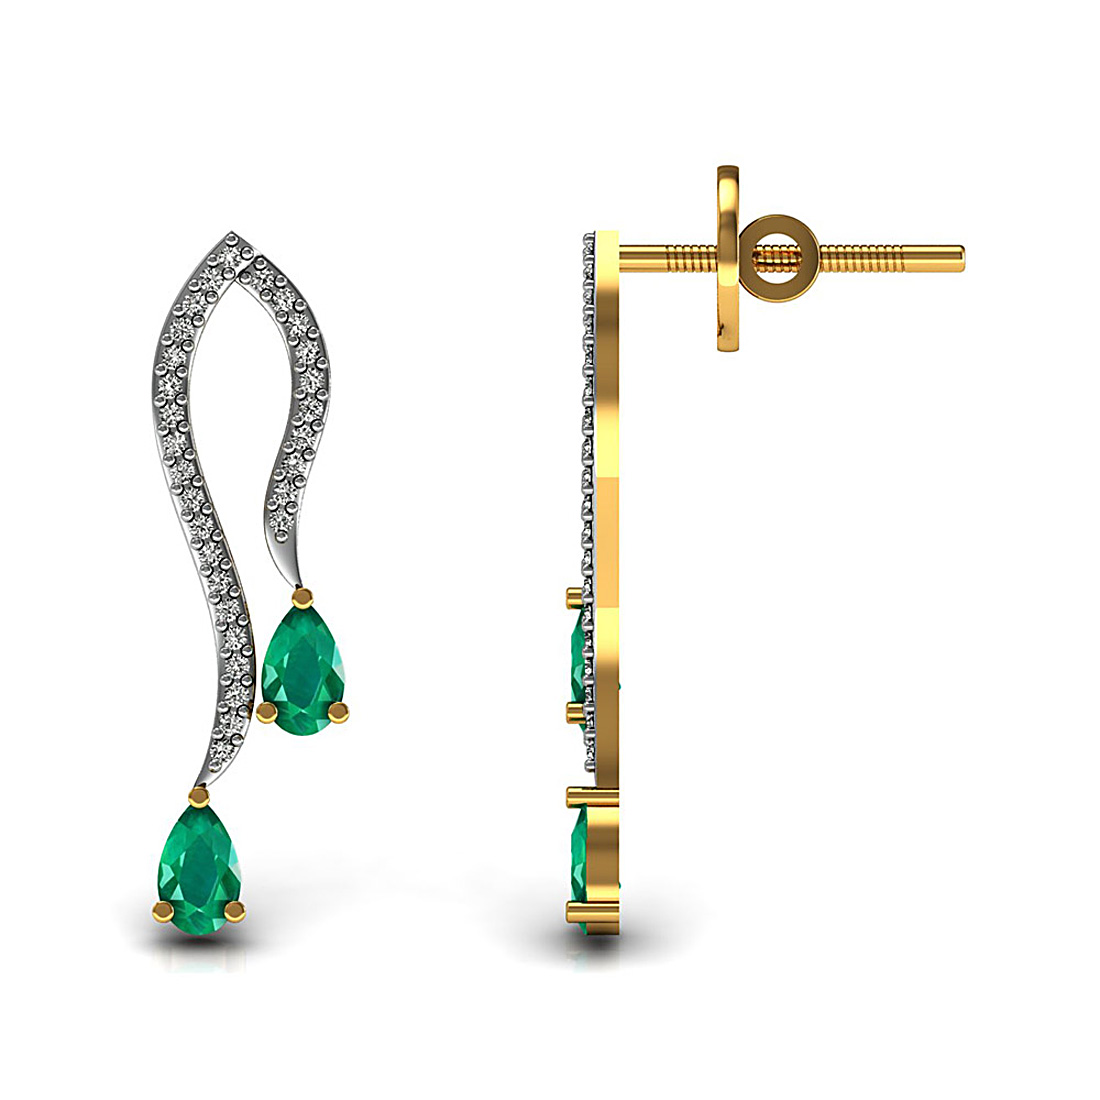 Natural emerald gemstone designer stud earrings made in 18k solid yellow gold adorned with real diamond.